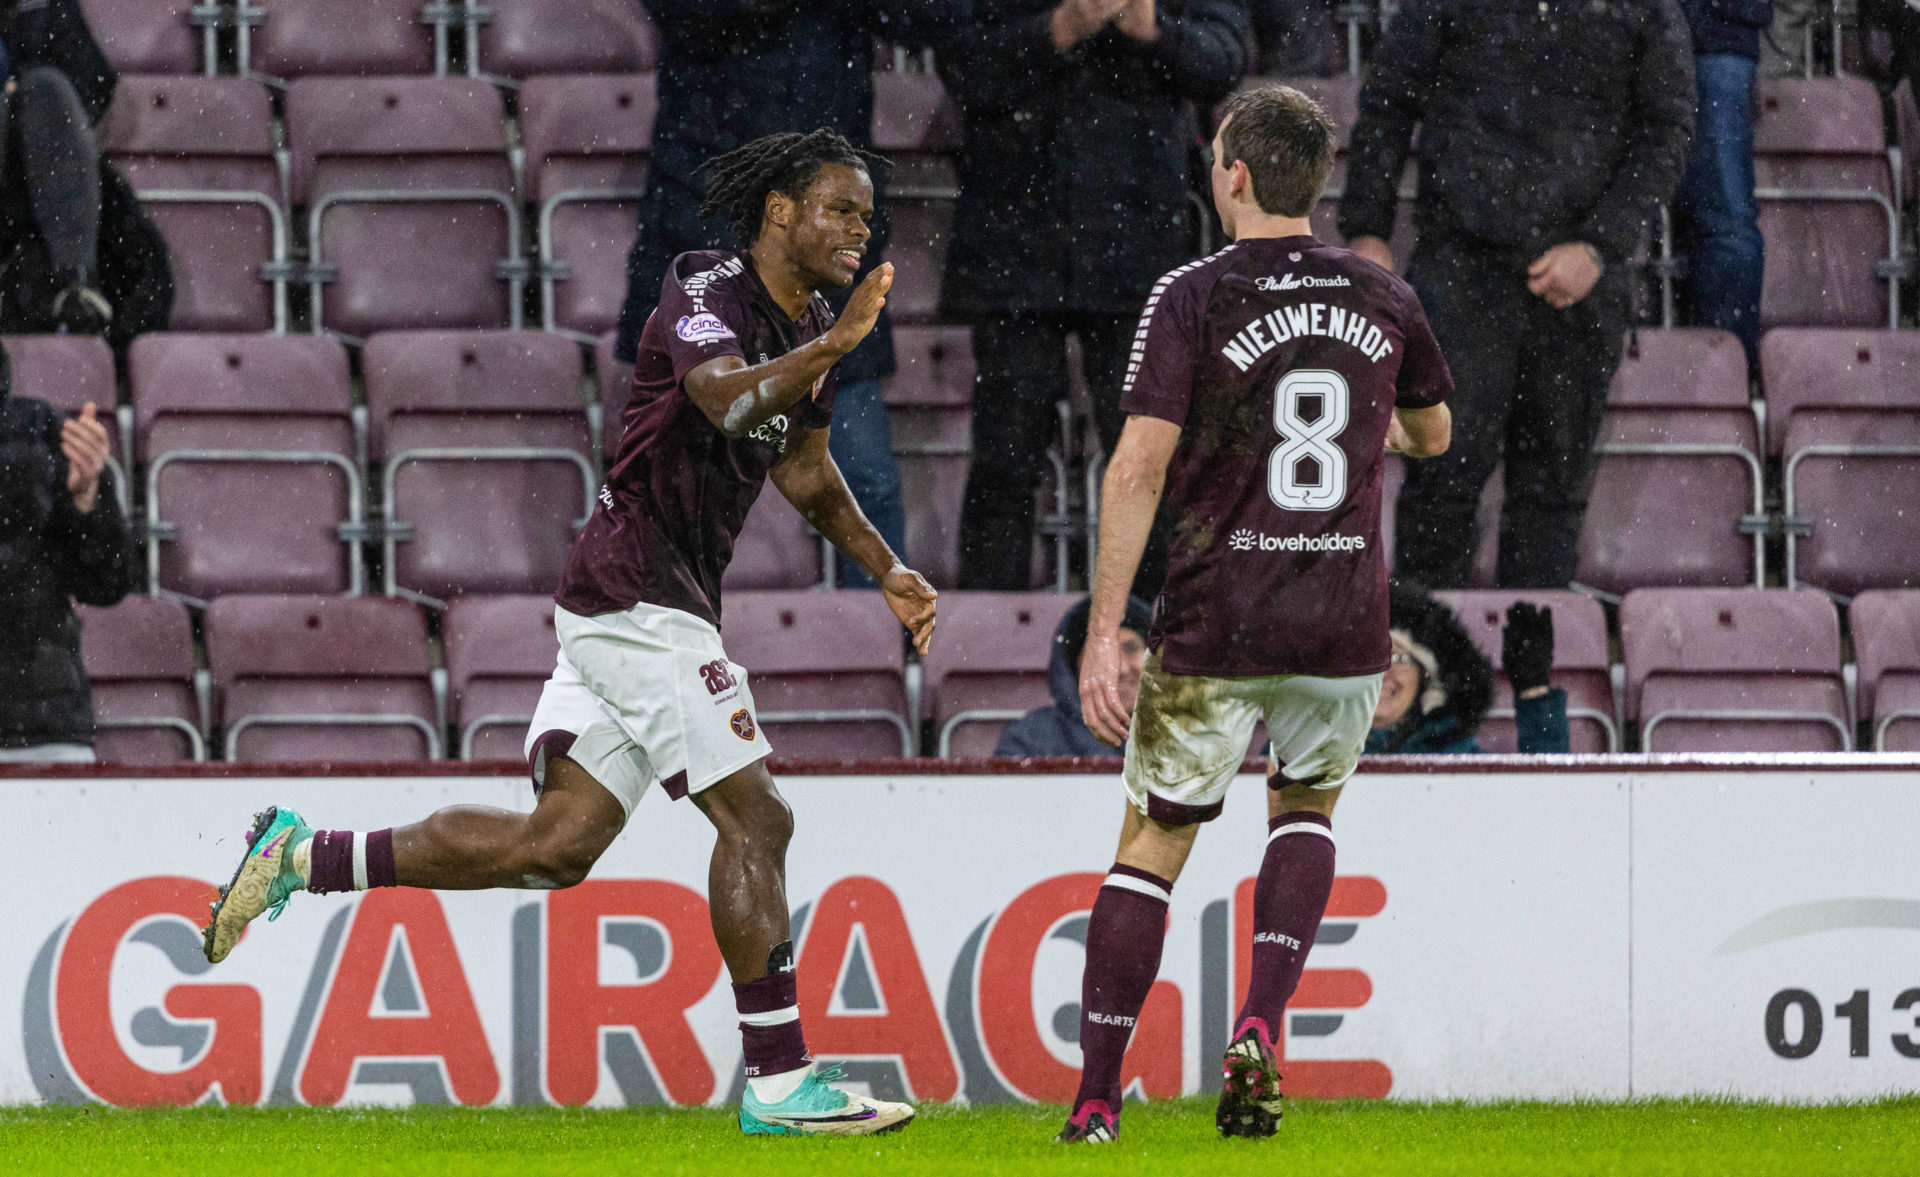 Hearts come from two goals behind to win against Dundee